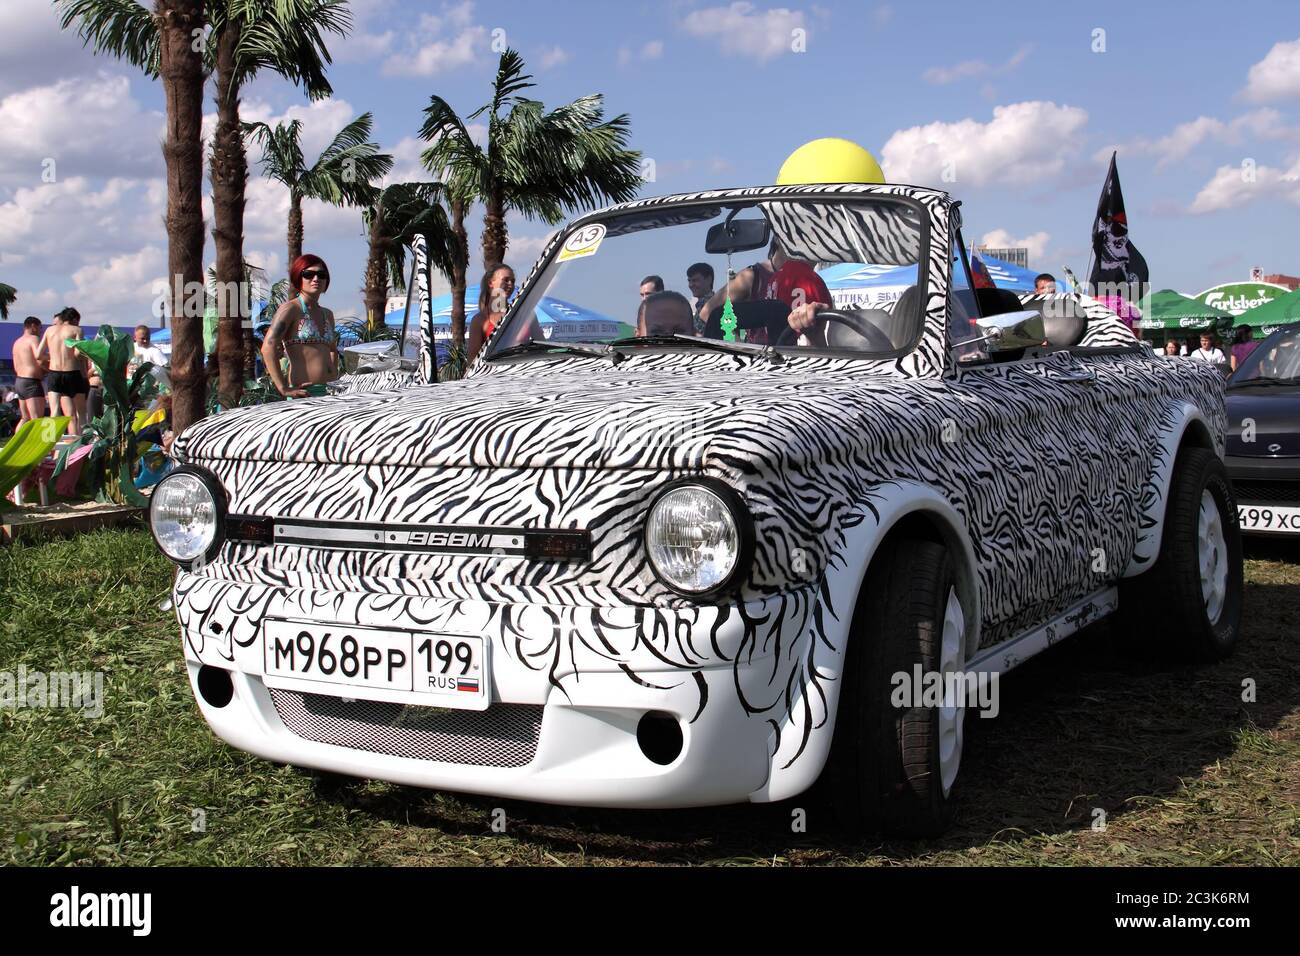 Moscow, Russia - May 25, 2019: Tuned Soviet vintage retro car Zaz 968M convertible. Repainted in zebra, and covered with artificial skin. Standing outside Stock Photo